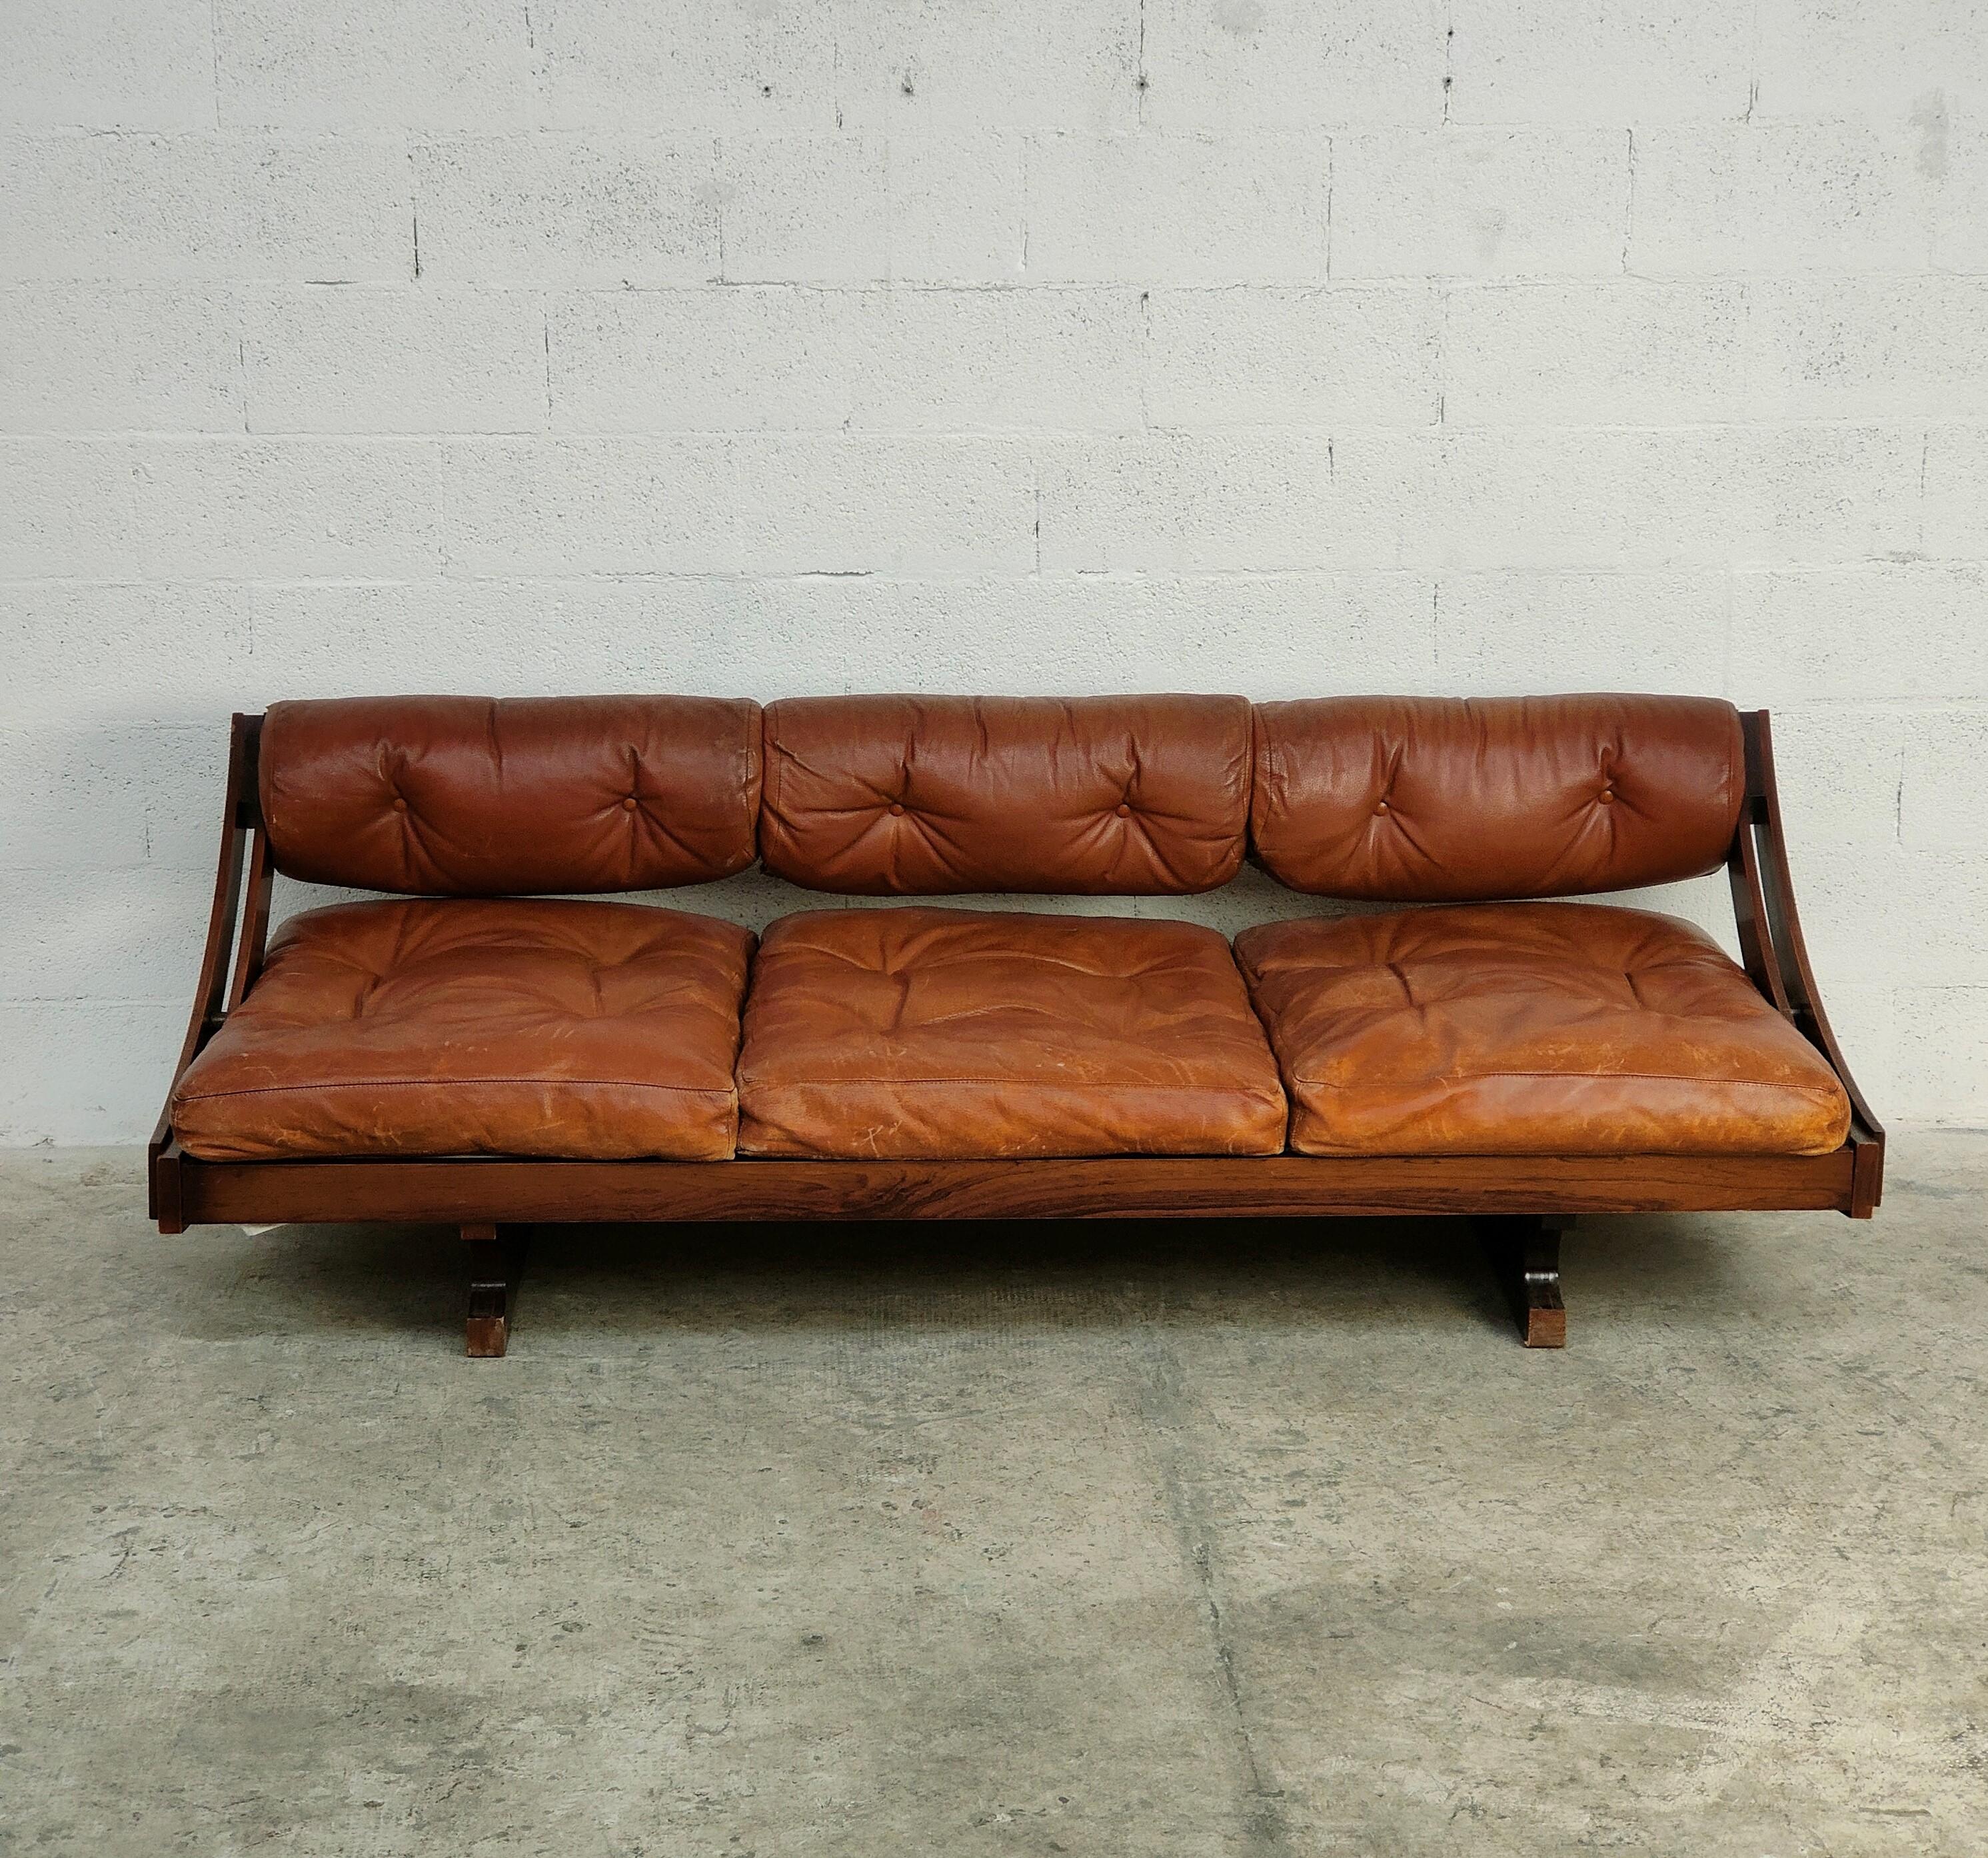 Leather daybed sofa GS195 model designed by Gianni Songia and produced by Sormani 1960s.
This daybed features an adjustable backrest leaving a flat bed surface or locked into the upright position for the sofa version. 
Extremely comfortable Italian